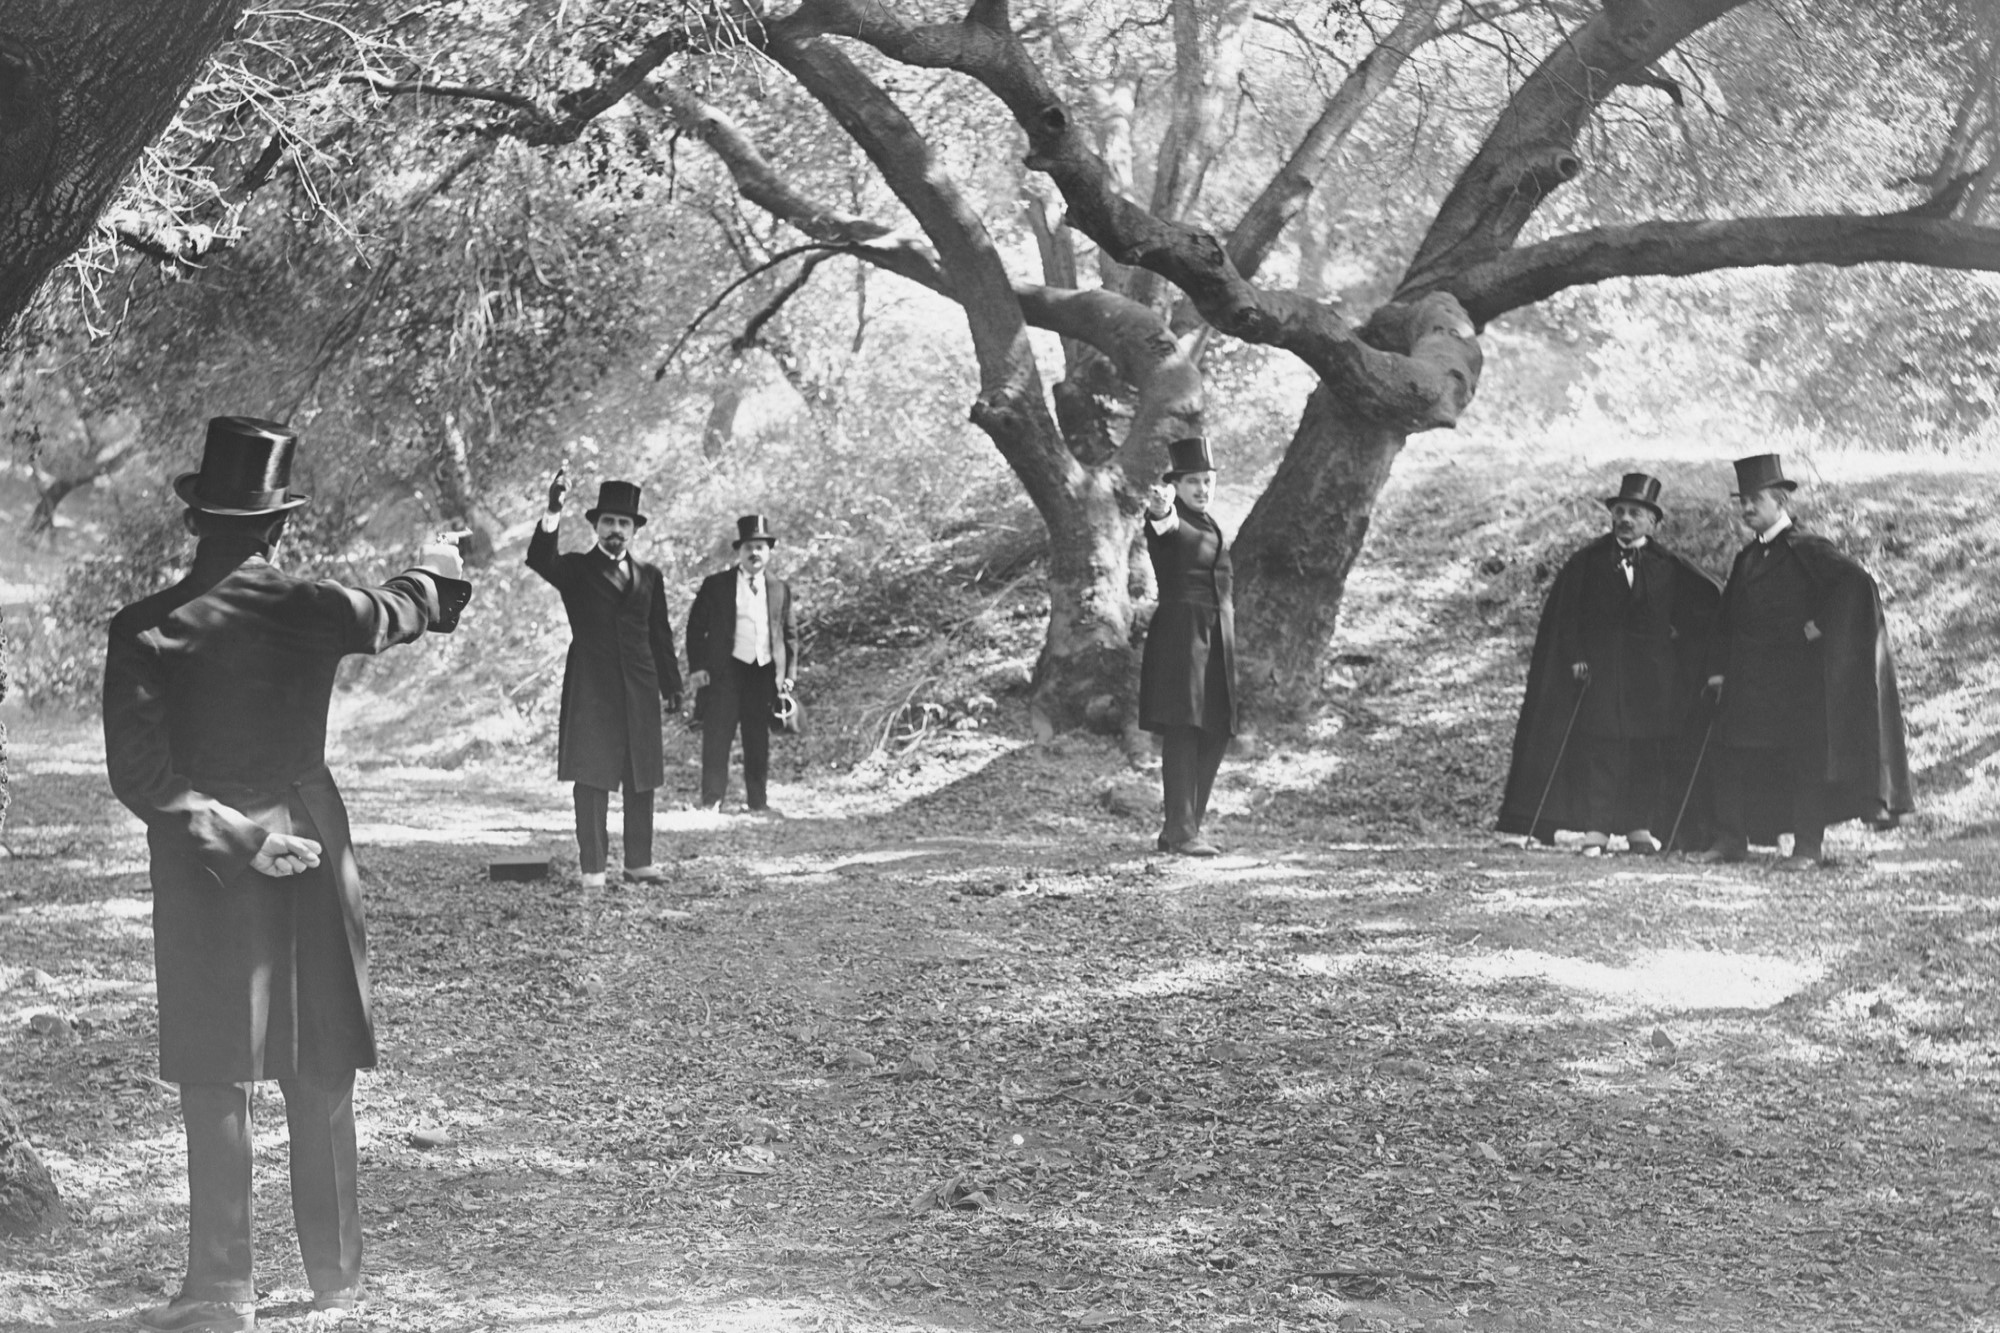 black-and-white photograph of gentlemen engaged in gun duel